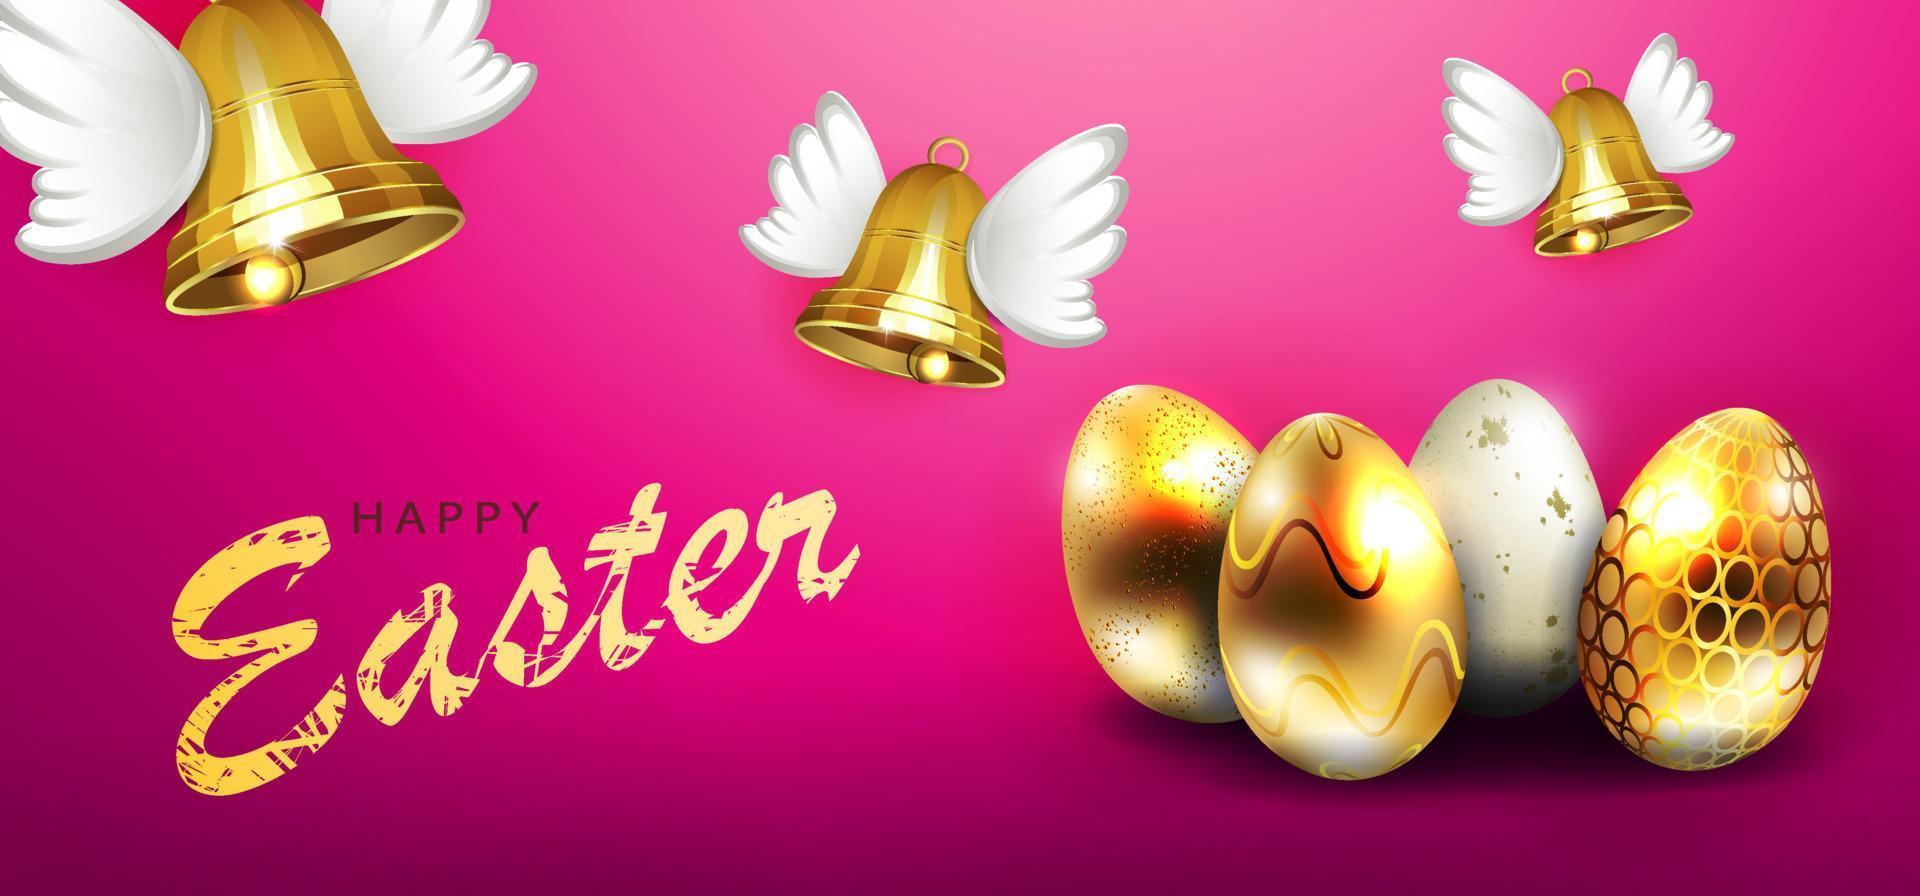 Illustration with Easter eggs and bells with golden colored wings. vector